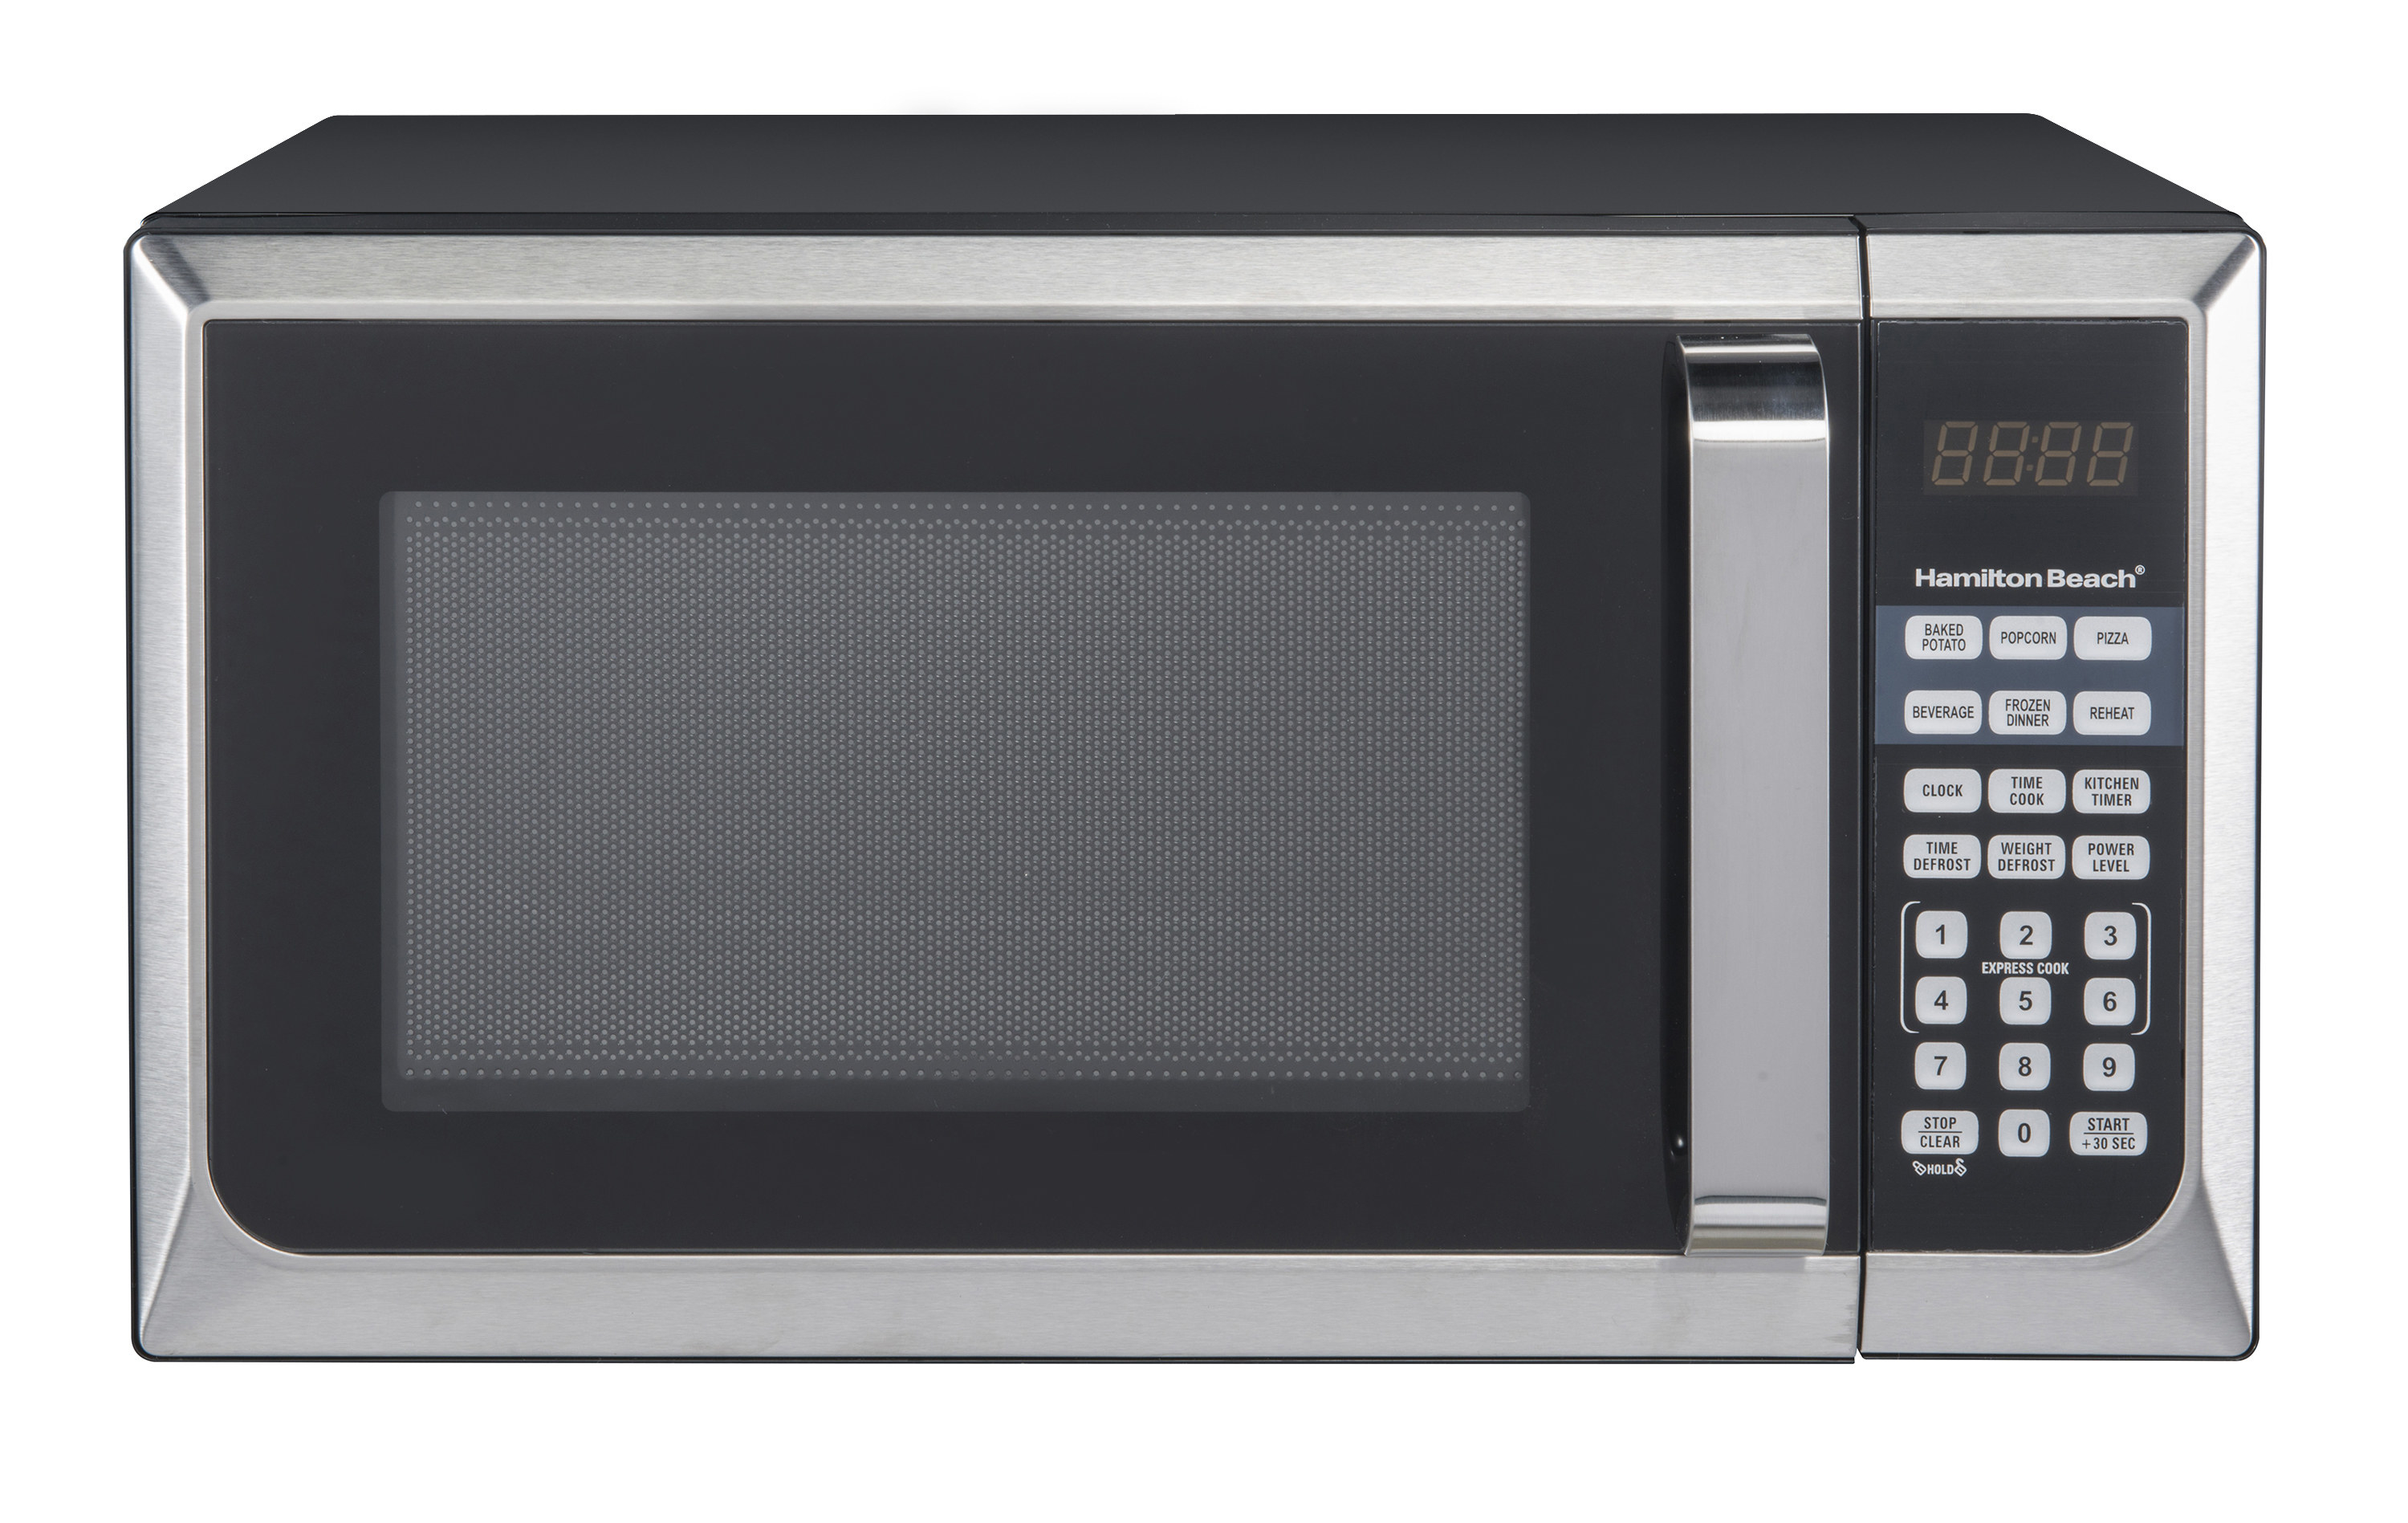 The microwave in stainless steel